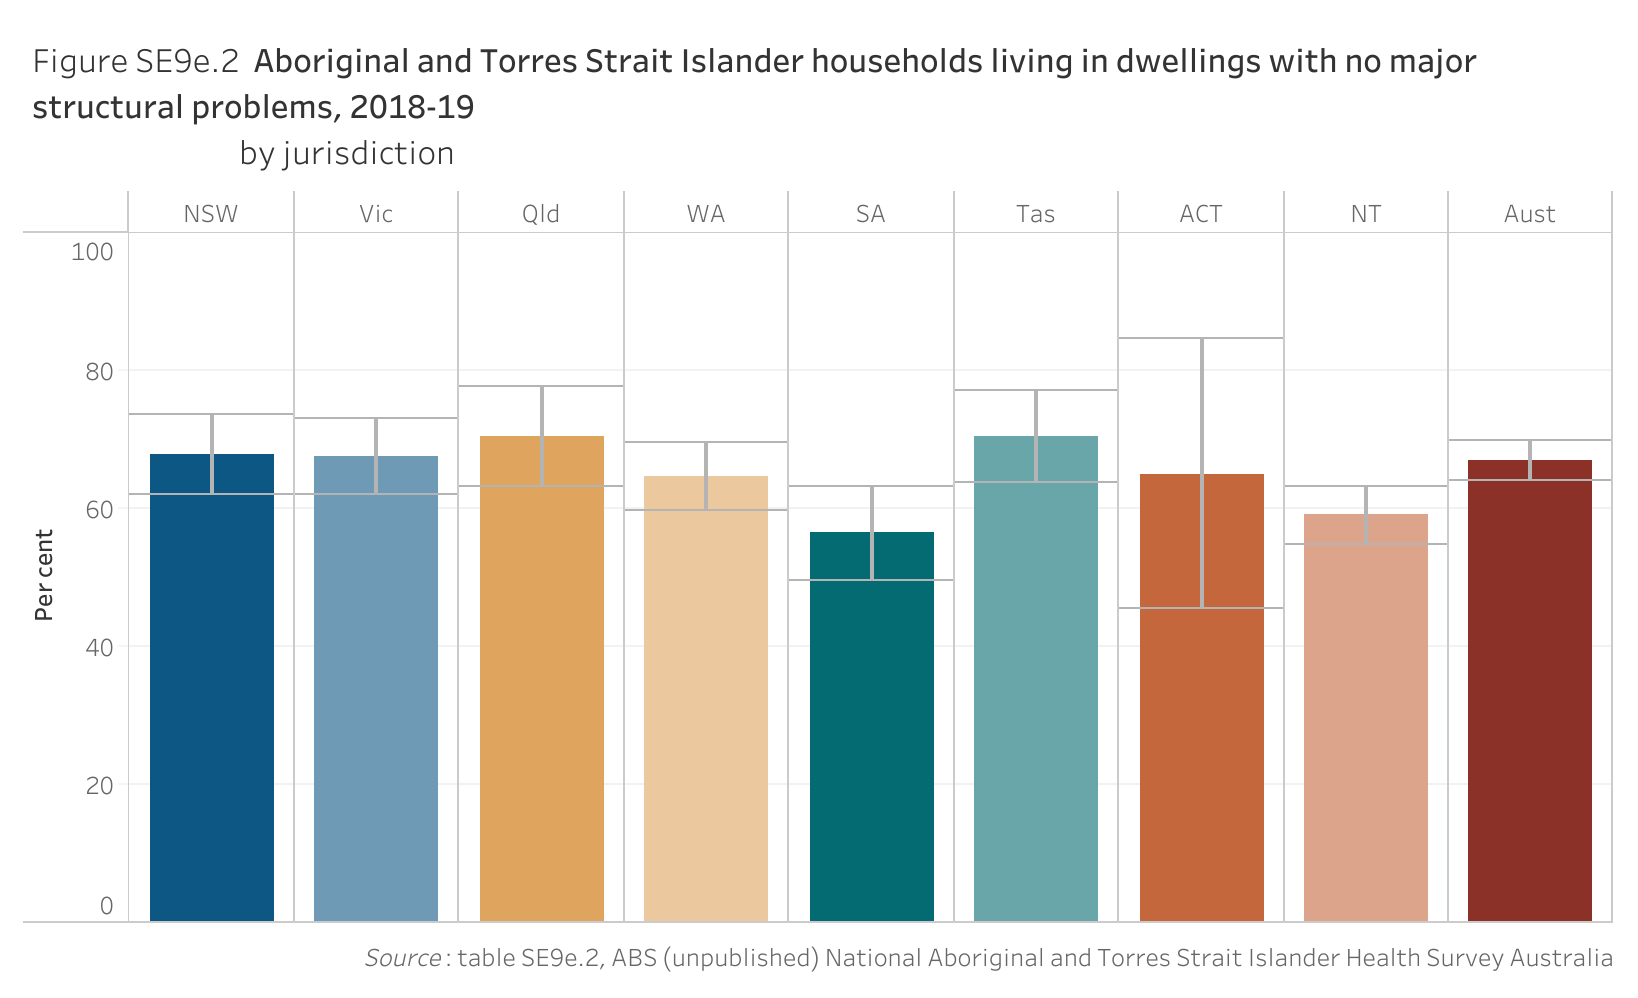 Figure SE9e.2. Bar chart showing the proportion of Aboriginal and Torres Strait Islander households living in dwellings with no major structural problems in 2018-19, by jurisdiction. Data table of figure SE9e.2 is below.